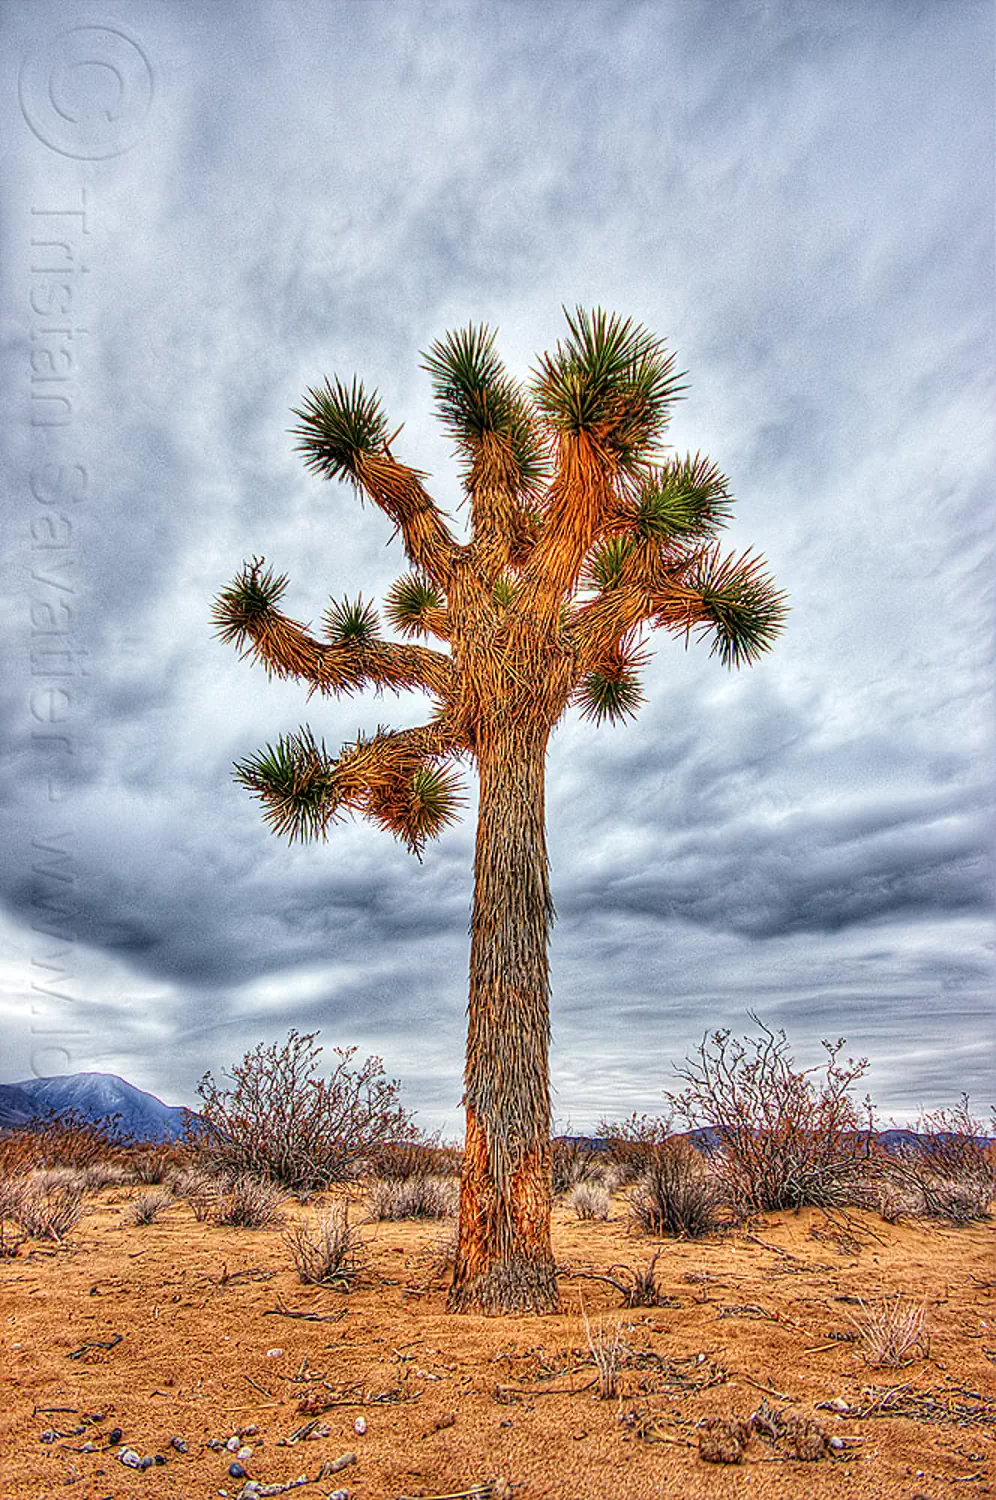 lone joshua tree in the desert (california), clouds, cloudy sky, death valley, joshua tree, sand, yucca brevifolia